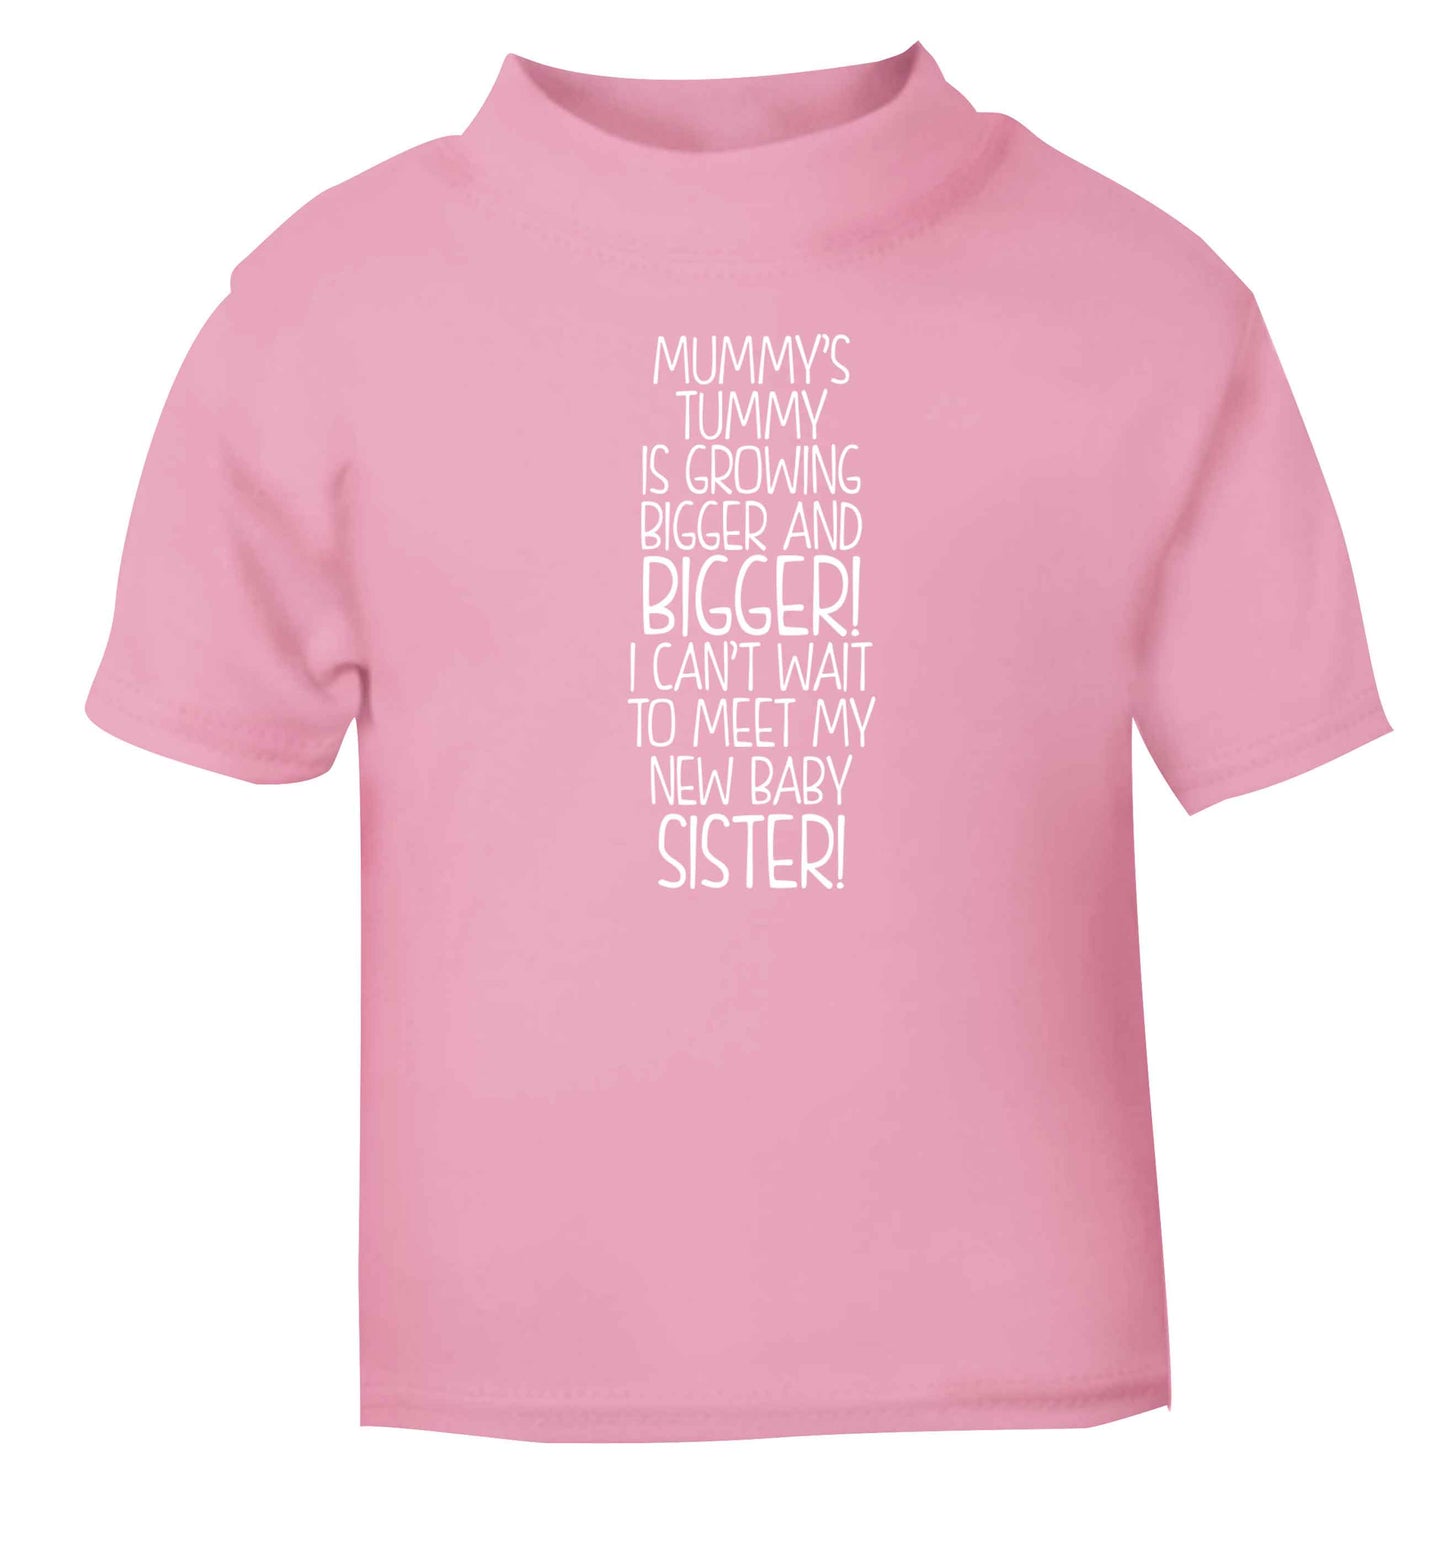 Mummy's tummy is growing bigger and bigger I can't wait to meet my new baby sister! light pink Baby Toddler Tshirt 2 Years